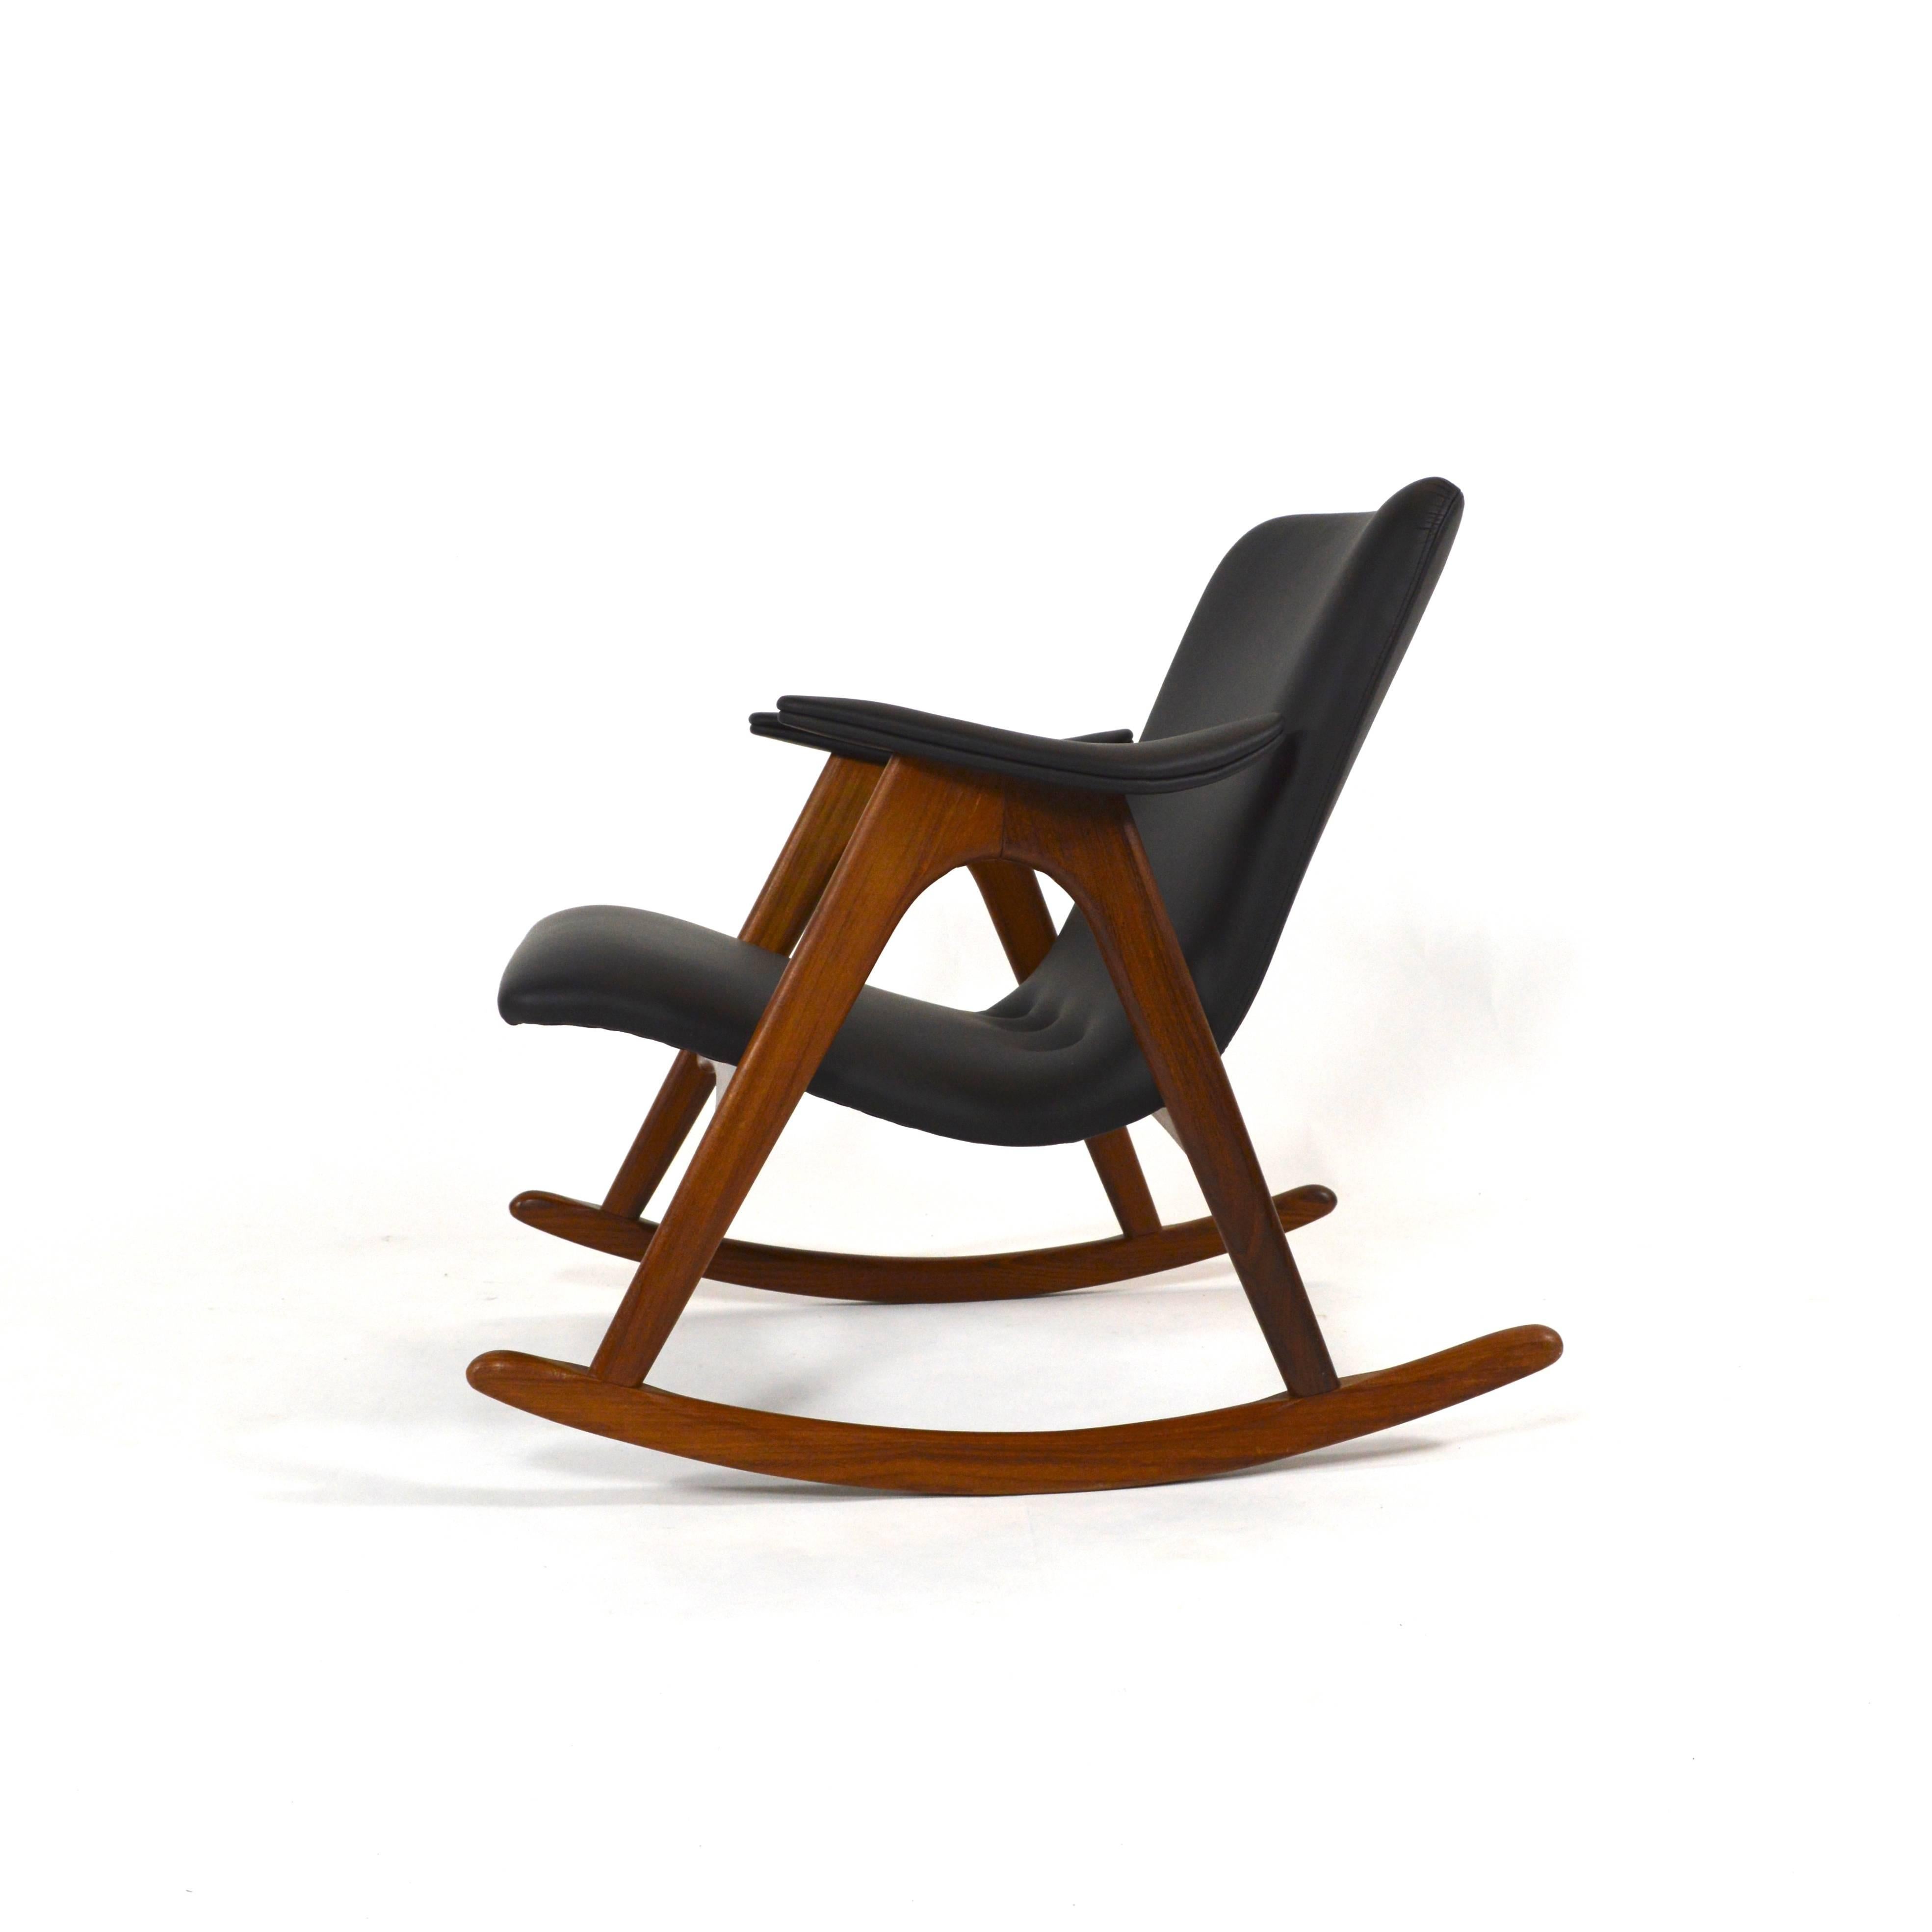 Rare rocking chair by Louis van Teeffelen for Walraven & Bevers, 1960s.
Reupholstered in a high quality black calf skin leather.
Solid teak base.
Excellent condition, like new!